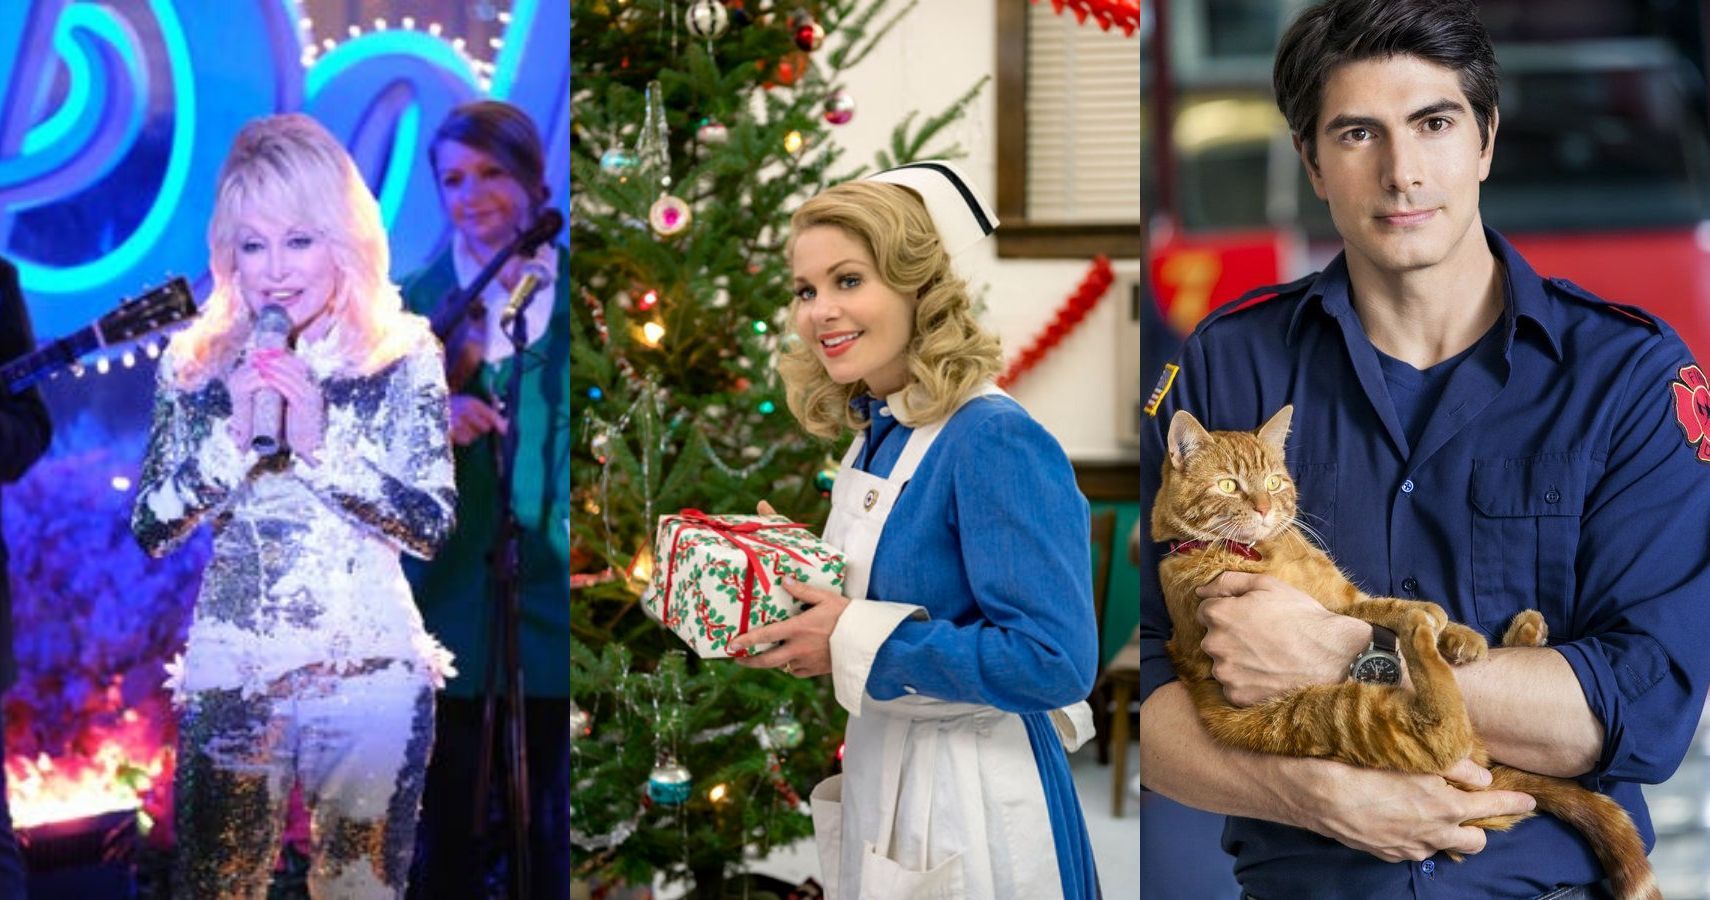 The 10 Best Hallmark Christmas Movie Storylines Of The Decade, Ranked